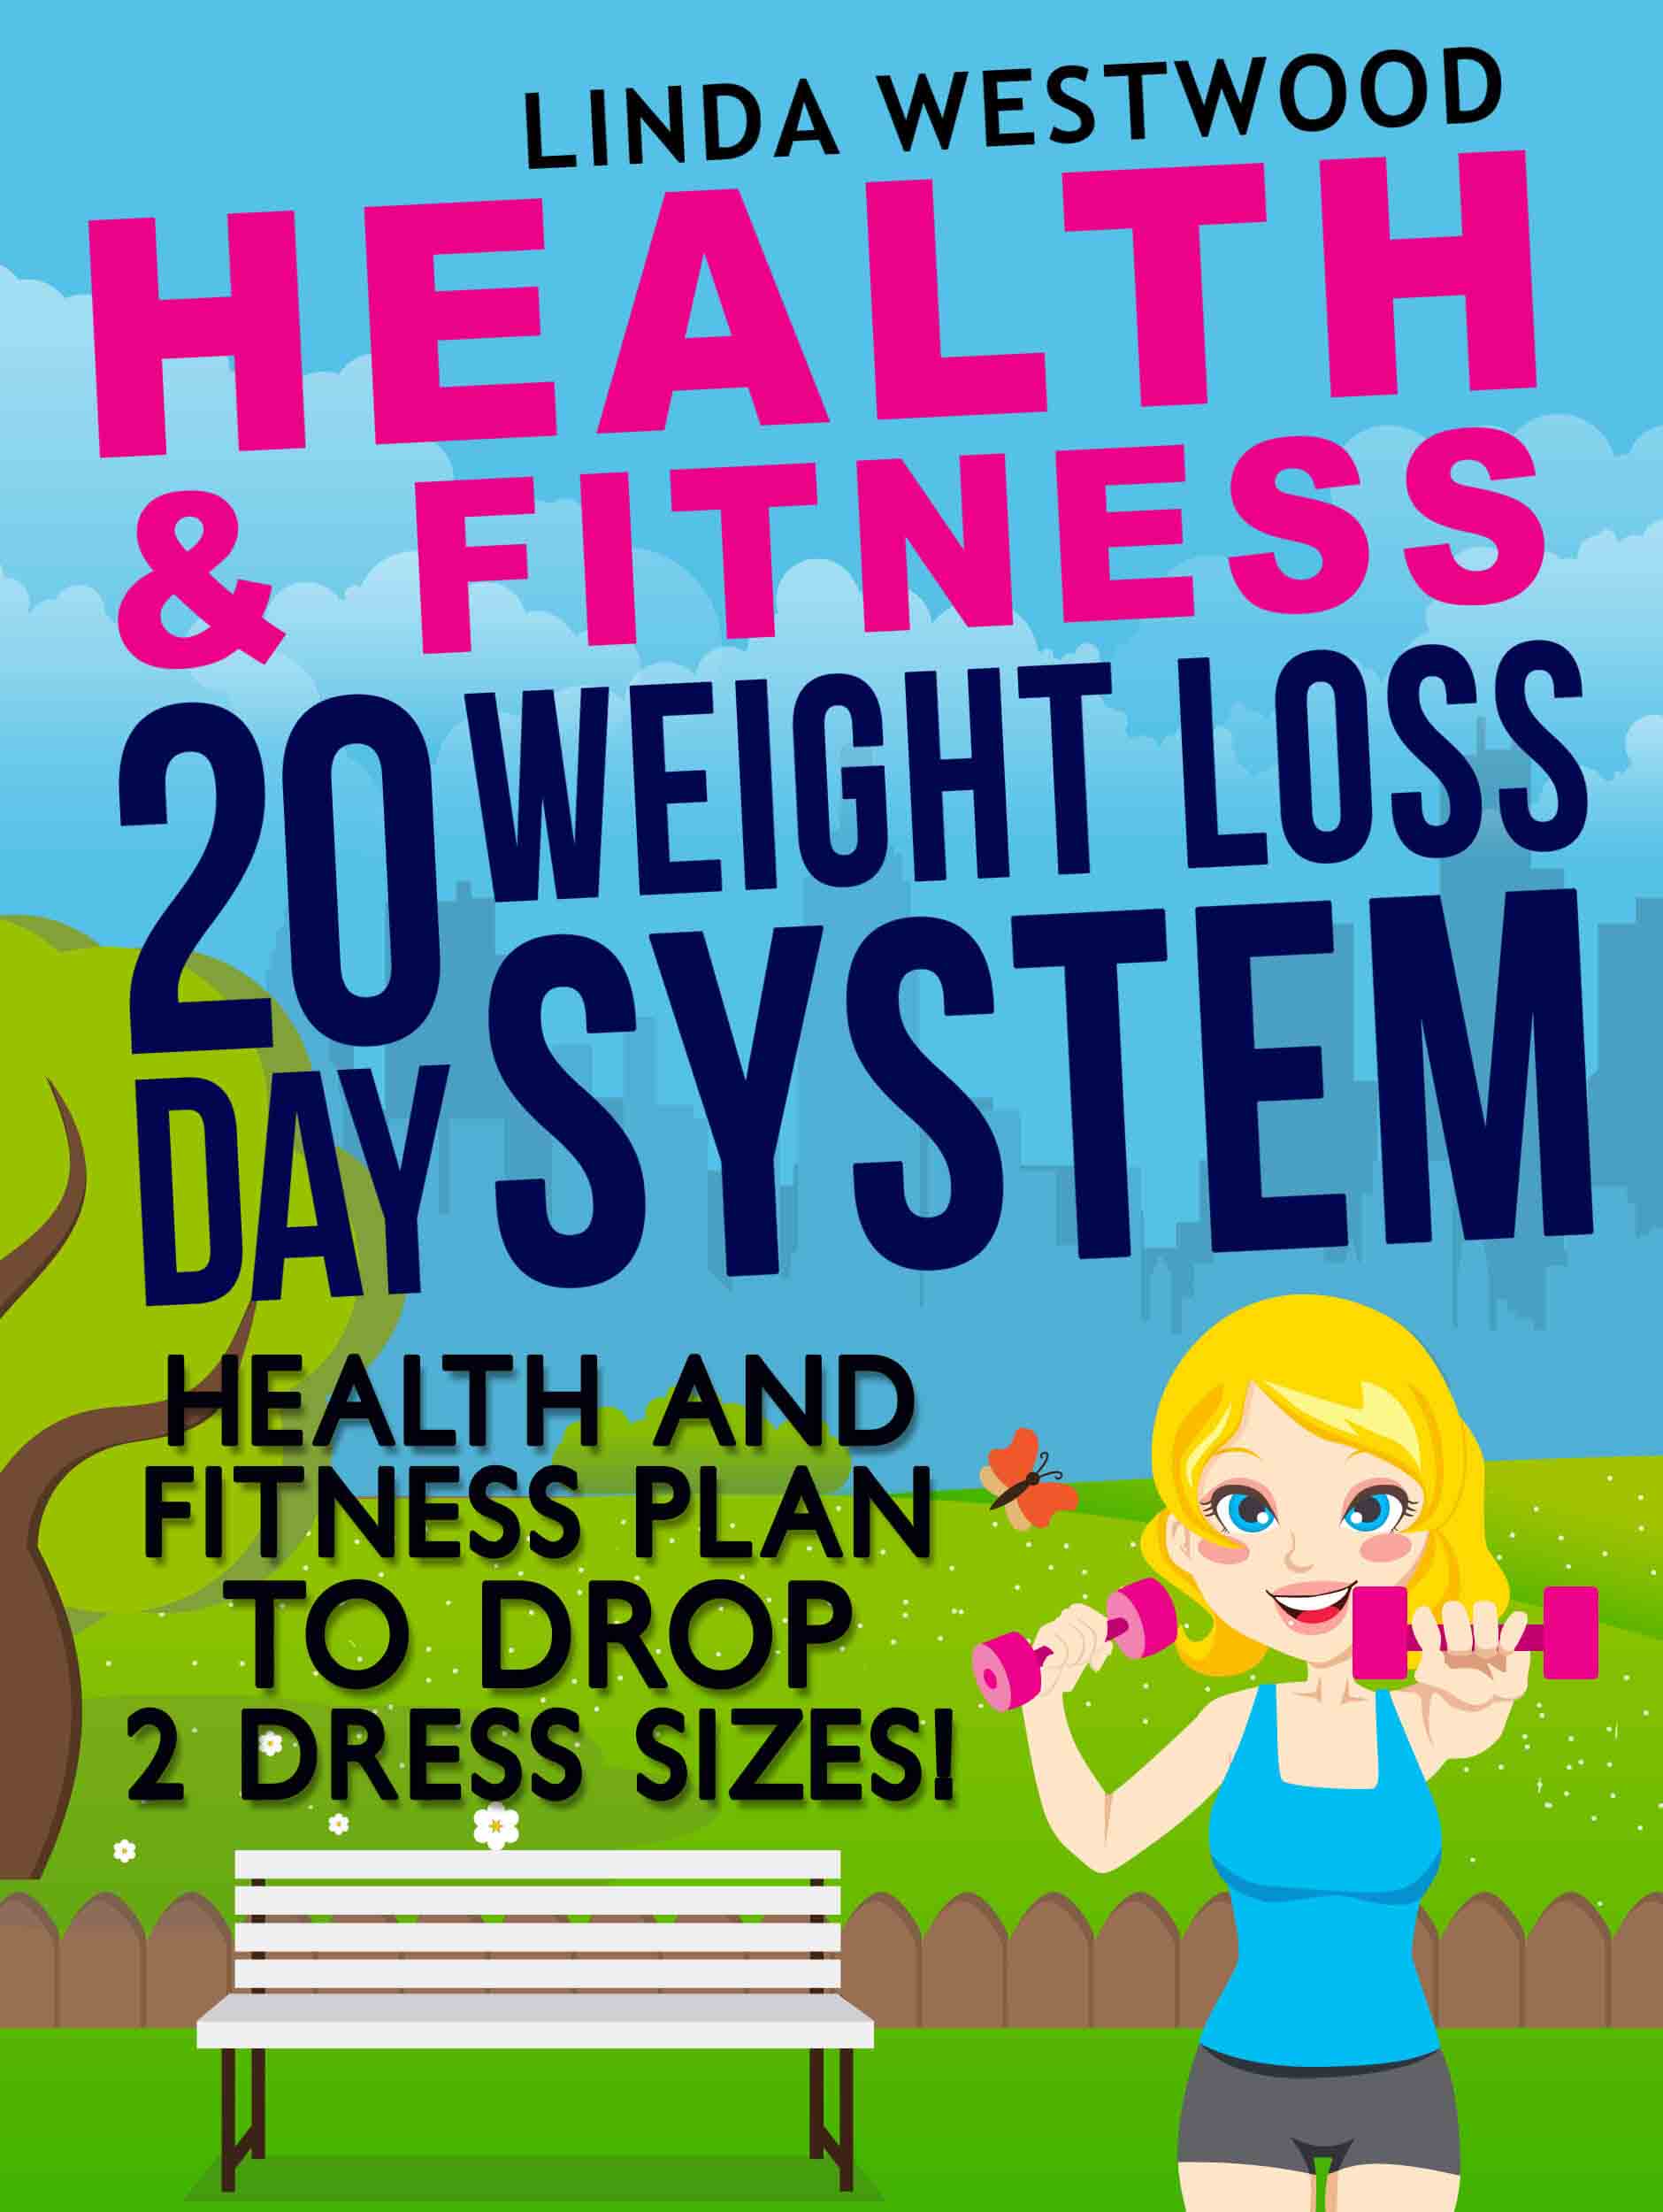 FREE: Health And Fitness: 20 Day Weight Loss System – Health And Fitness Plan To Drop 2 Dress Sizes! by Linda Westwood